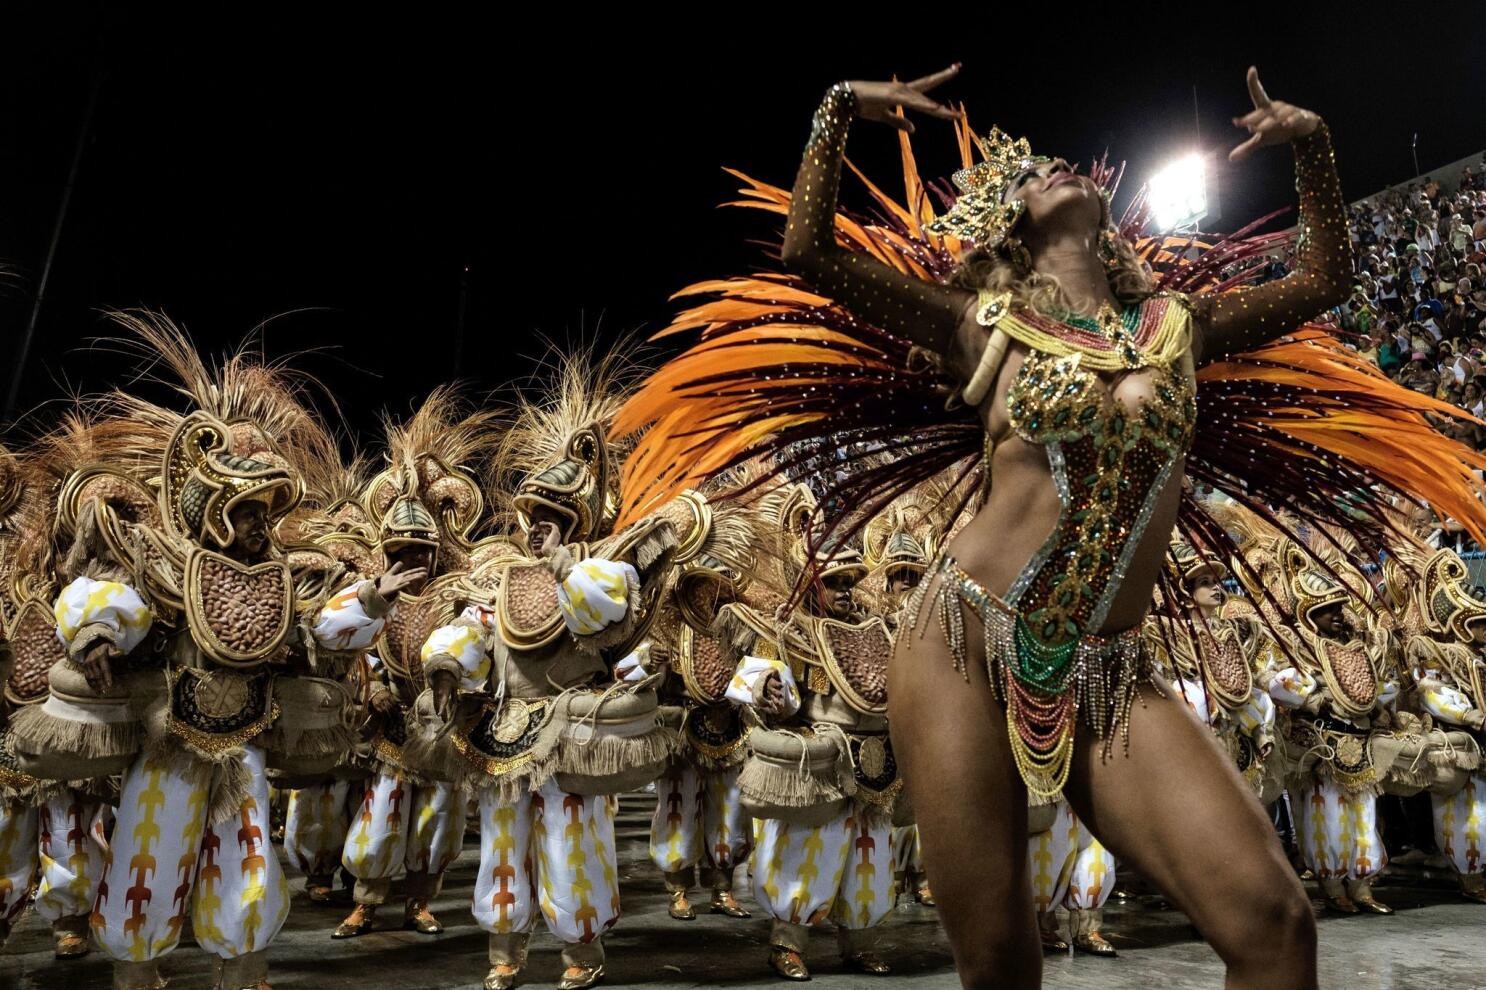 Rio's flamboyant Carnival parade is back after the pandemic